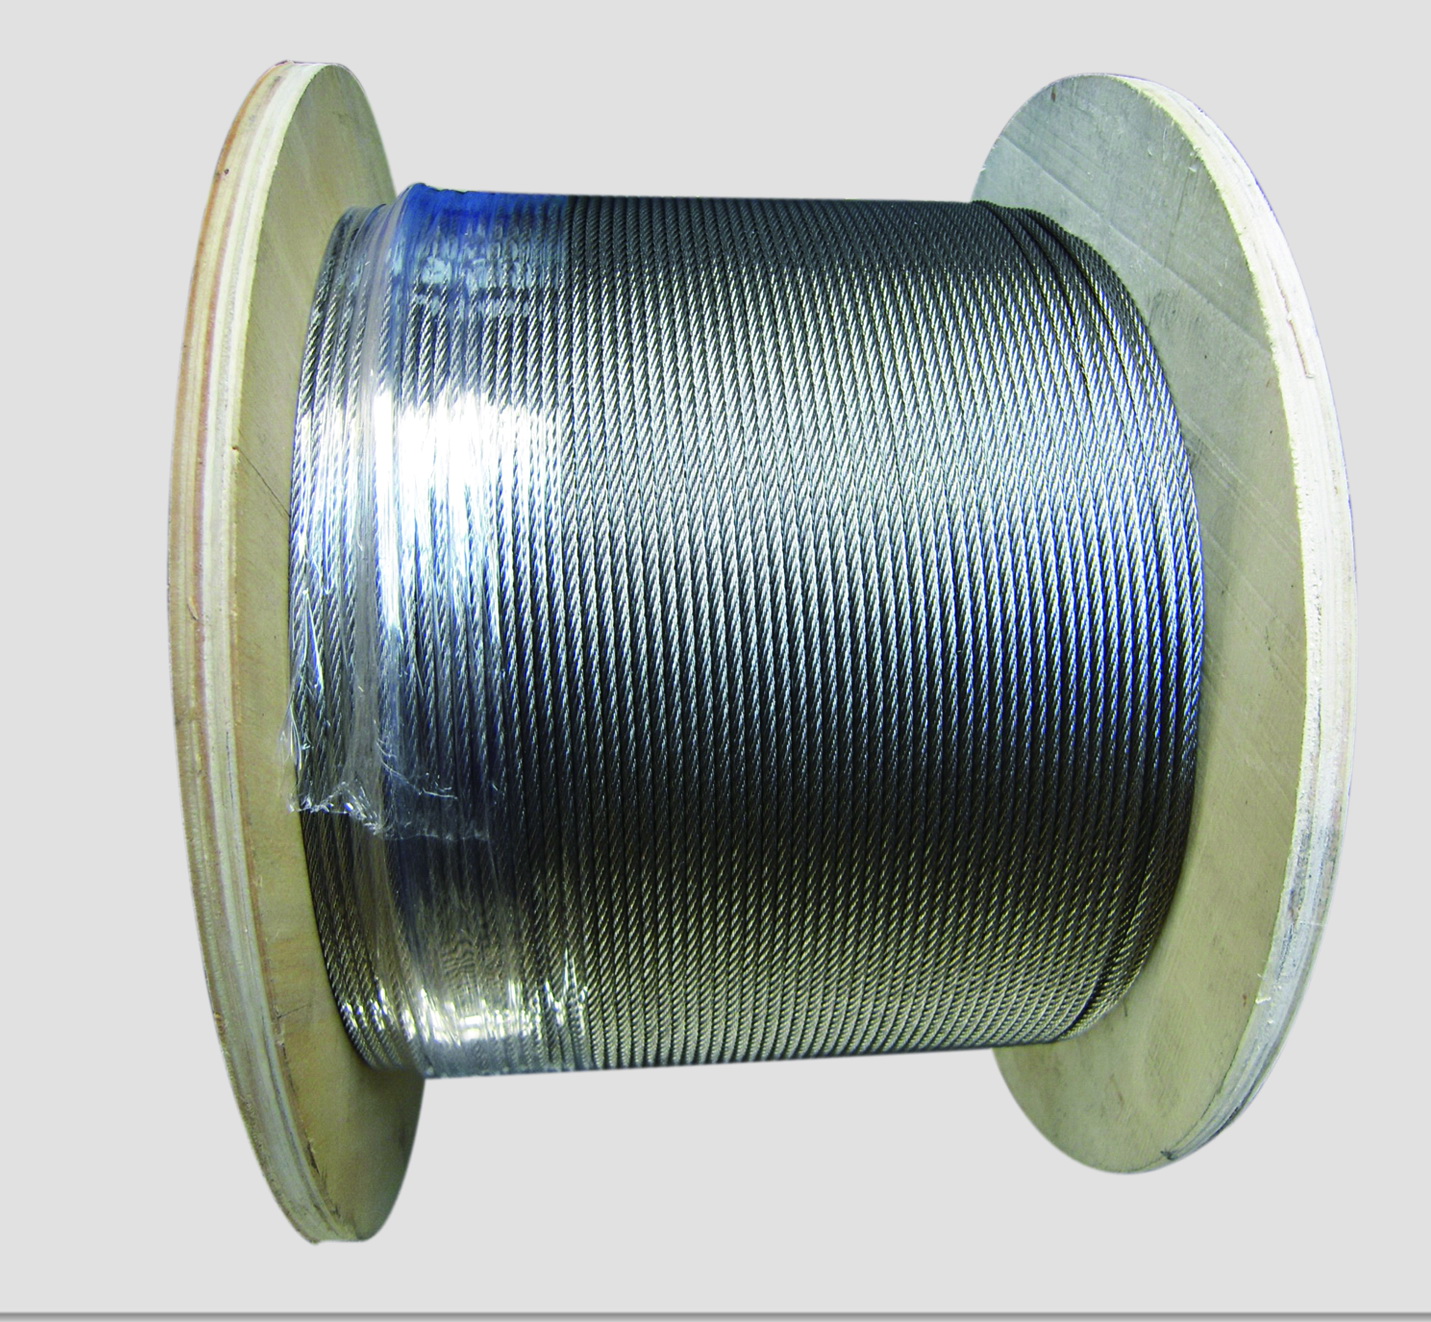 Ohaha Grinding Machine 1mm Dia 7x7 20M Long Stainless Steel Wire Rope Cable W... 